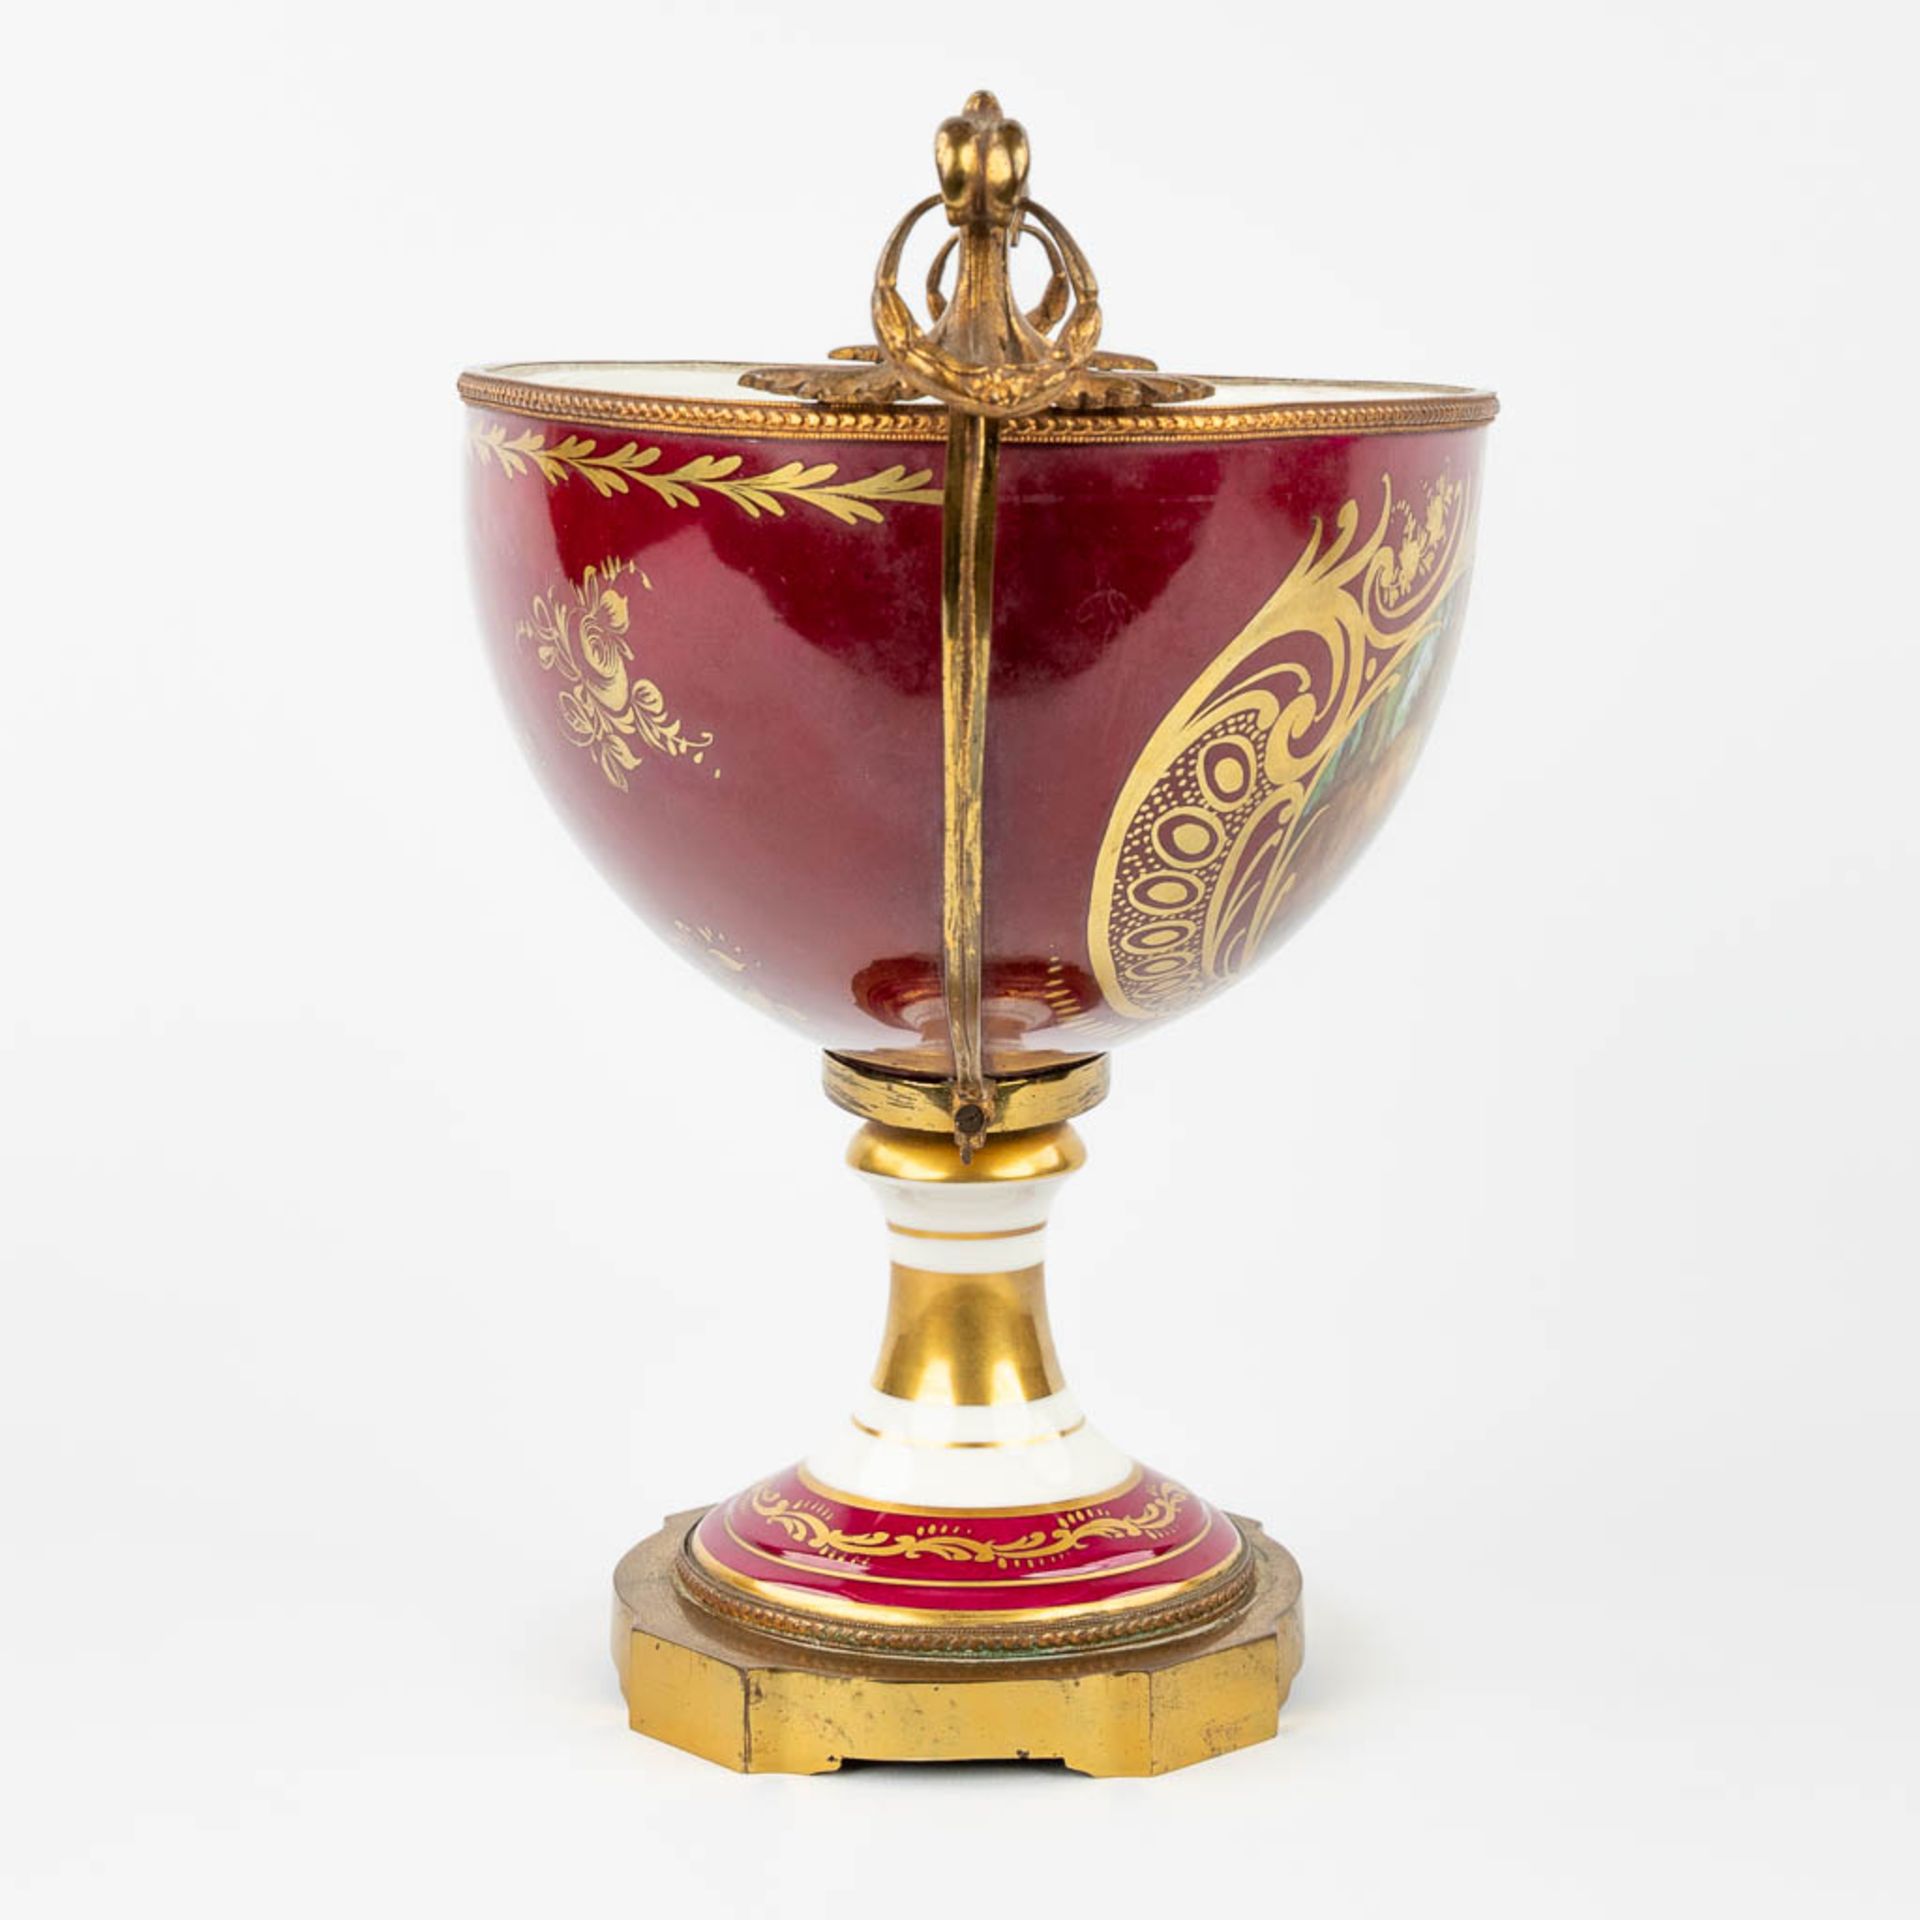 Limoges, a large bowl on a stand, with hand-painted decor. (L:20 x W:37 x H:31 cm) - Image 3 of 16